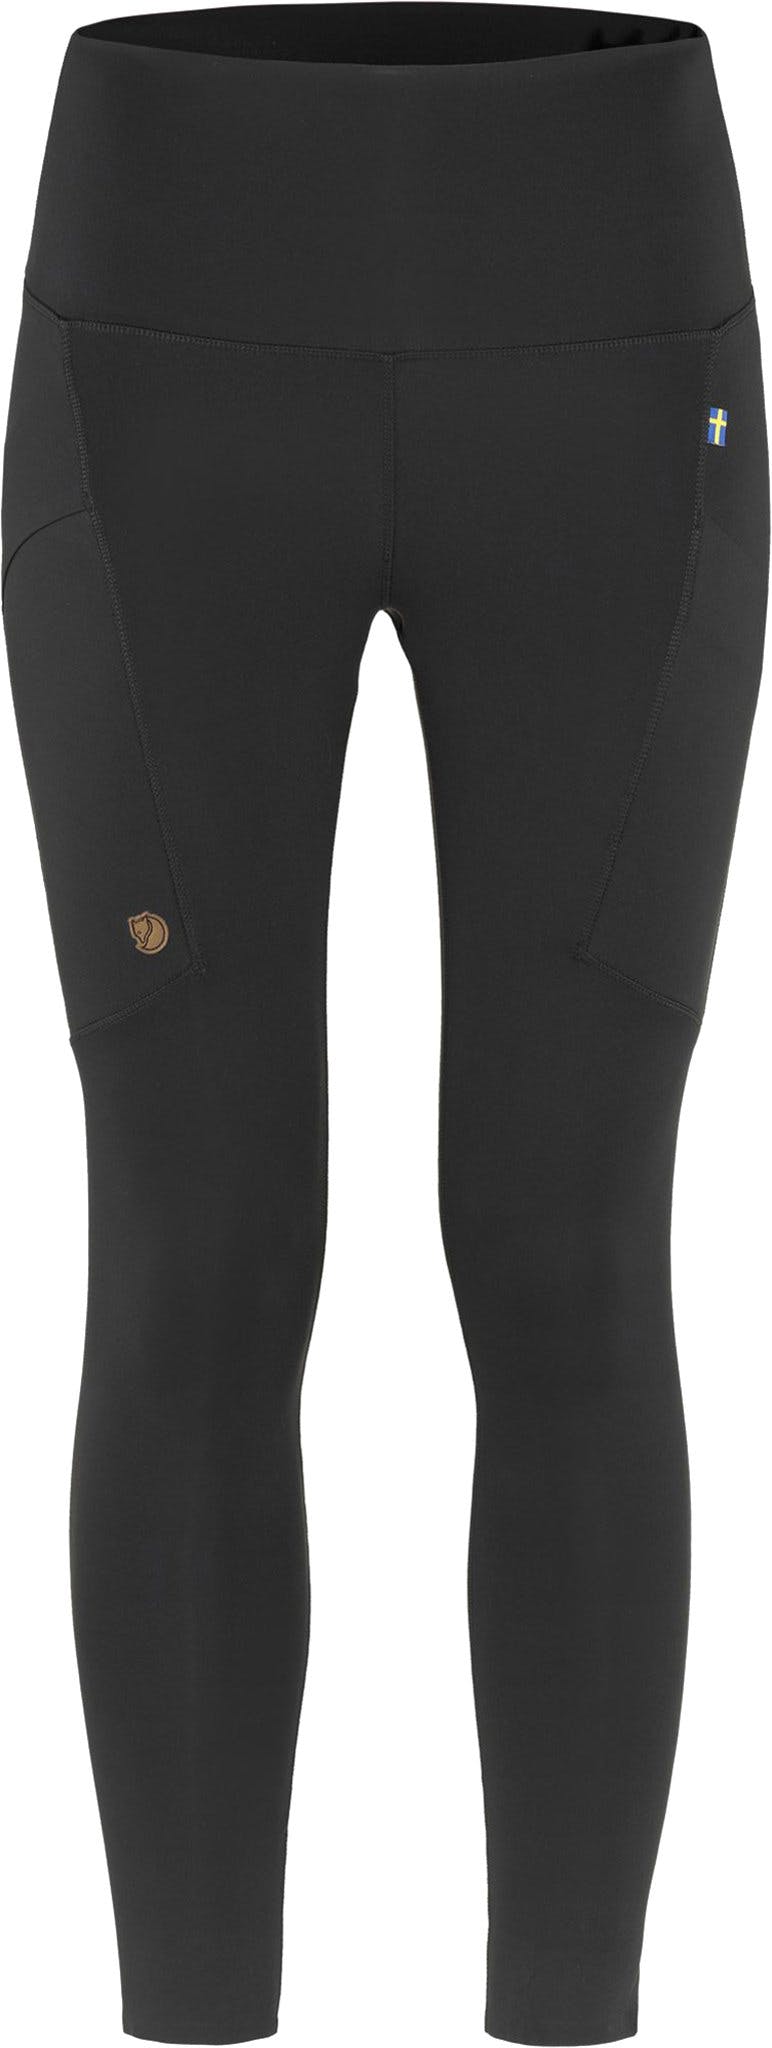 Product image for Abisko Tights - Women's